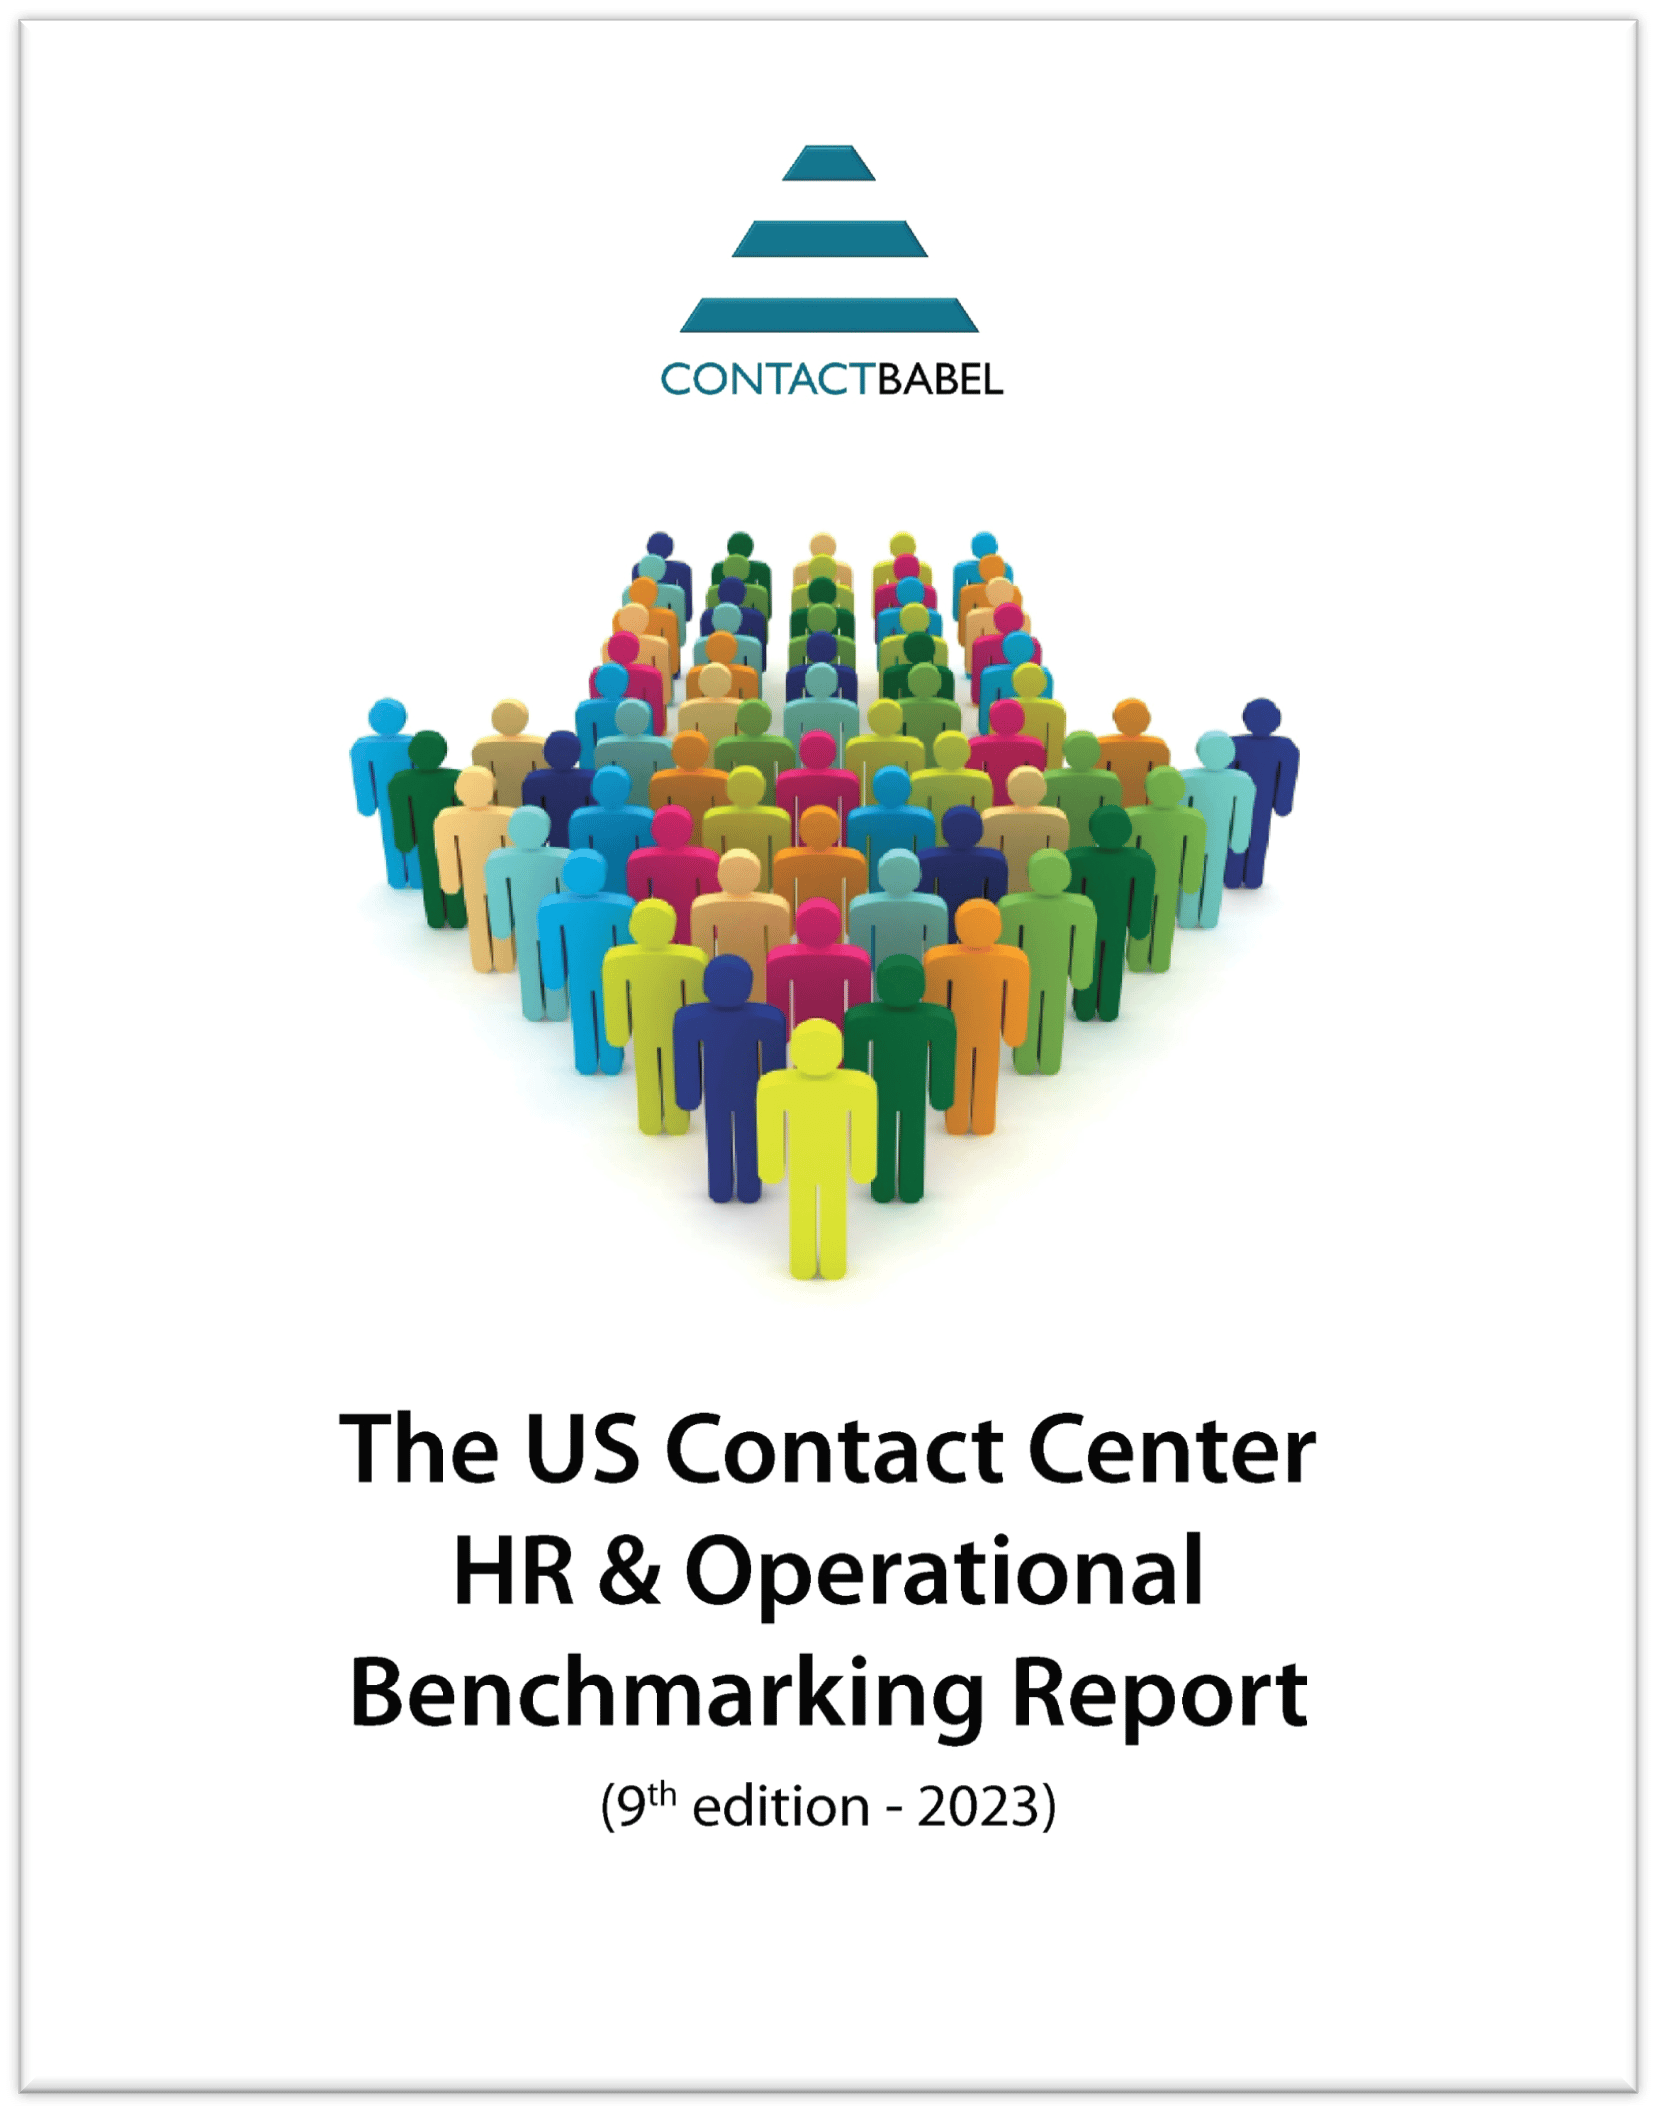 The 2023 US Contact Center HR & Operational Benchmarking Report